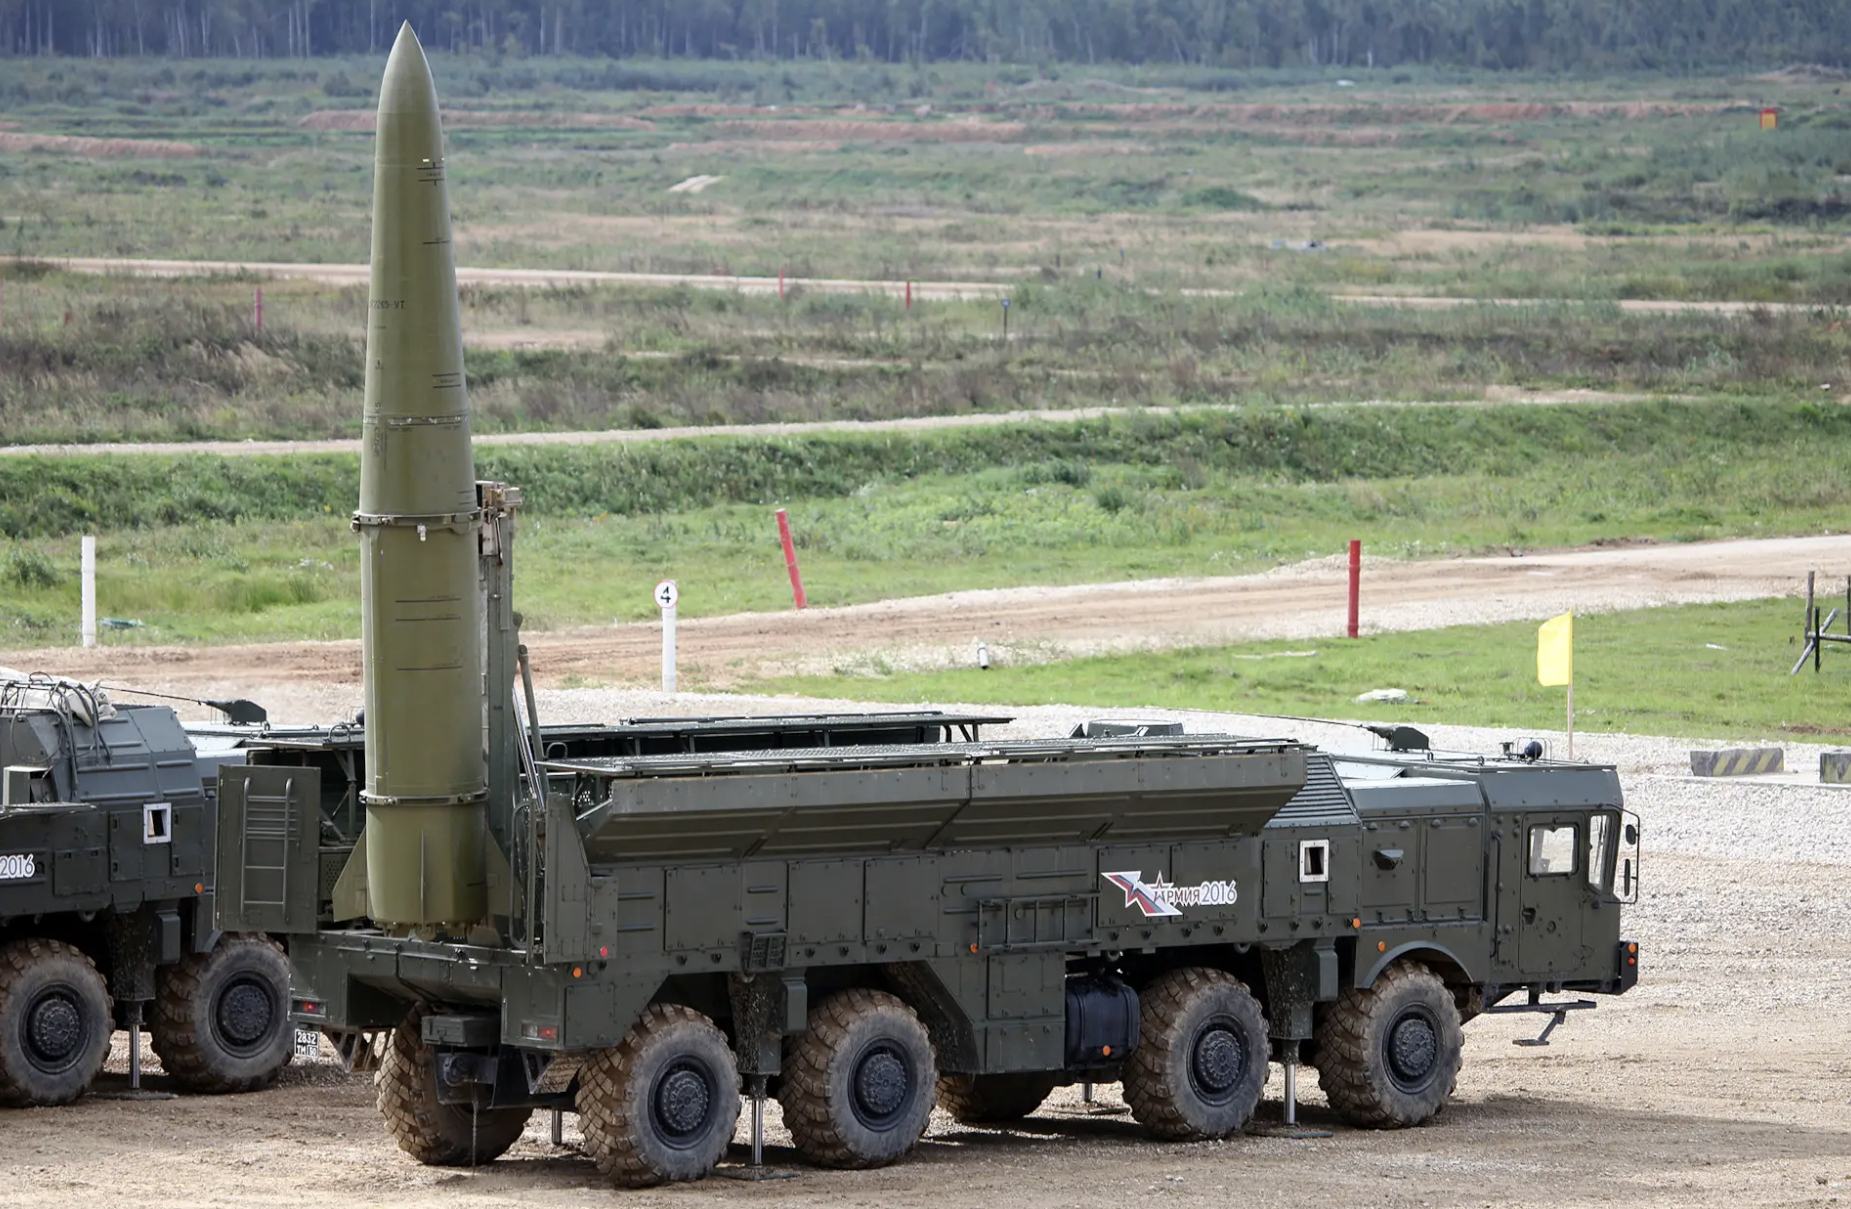 The Iskander-M short-range ballistic missile can carry a nuclear or a conventional warhead and is among Russia’s available tactical nuclear weapons.&nbsp;<em>Vitaly Kuzmin via Wikimedia Commons</em>